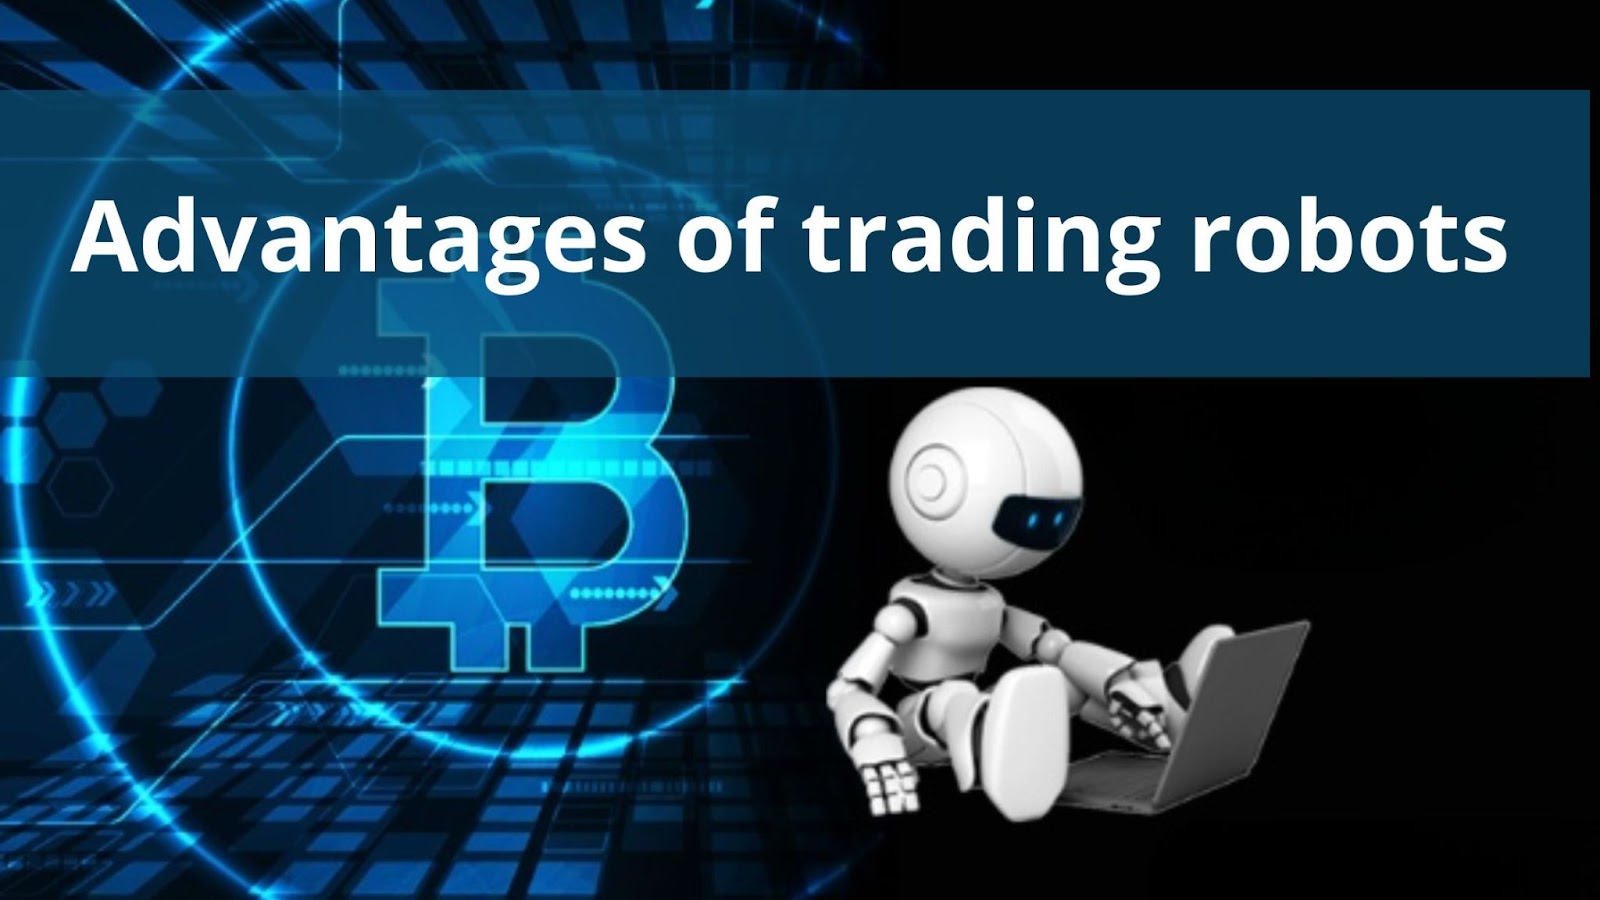 The main advantages of trading robots